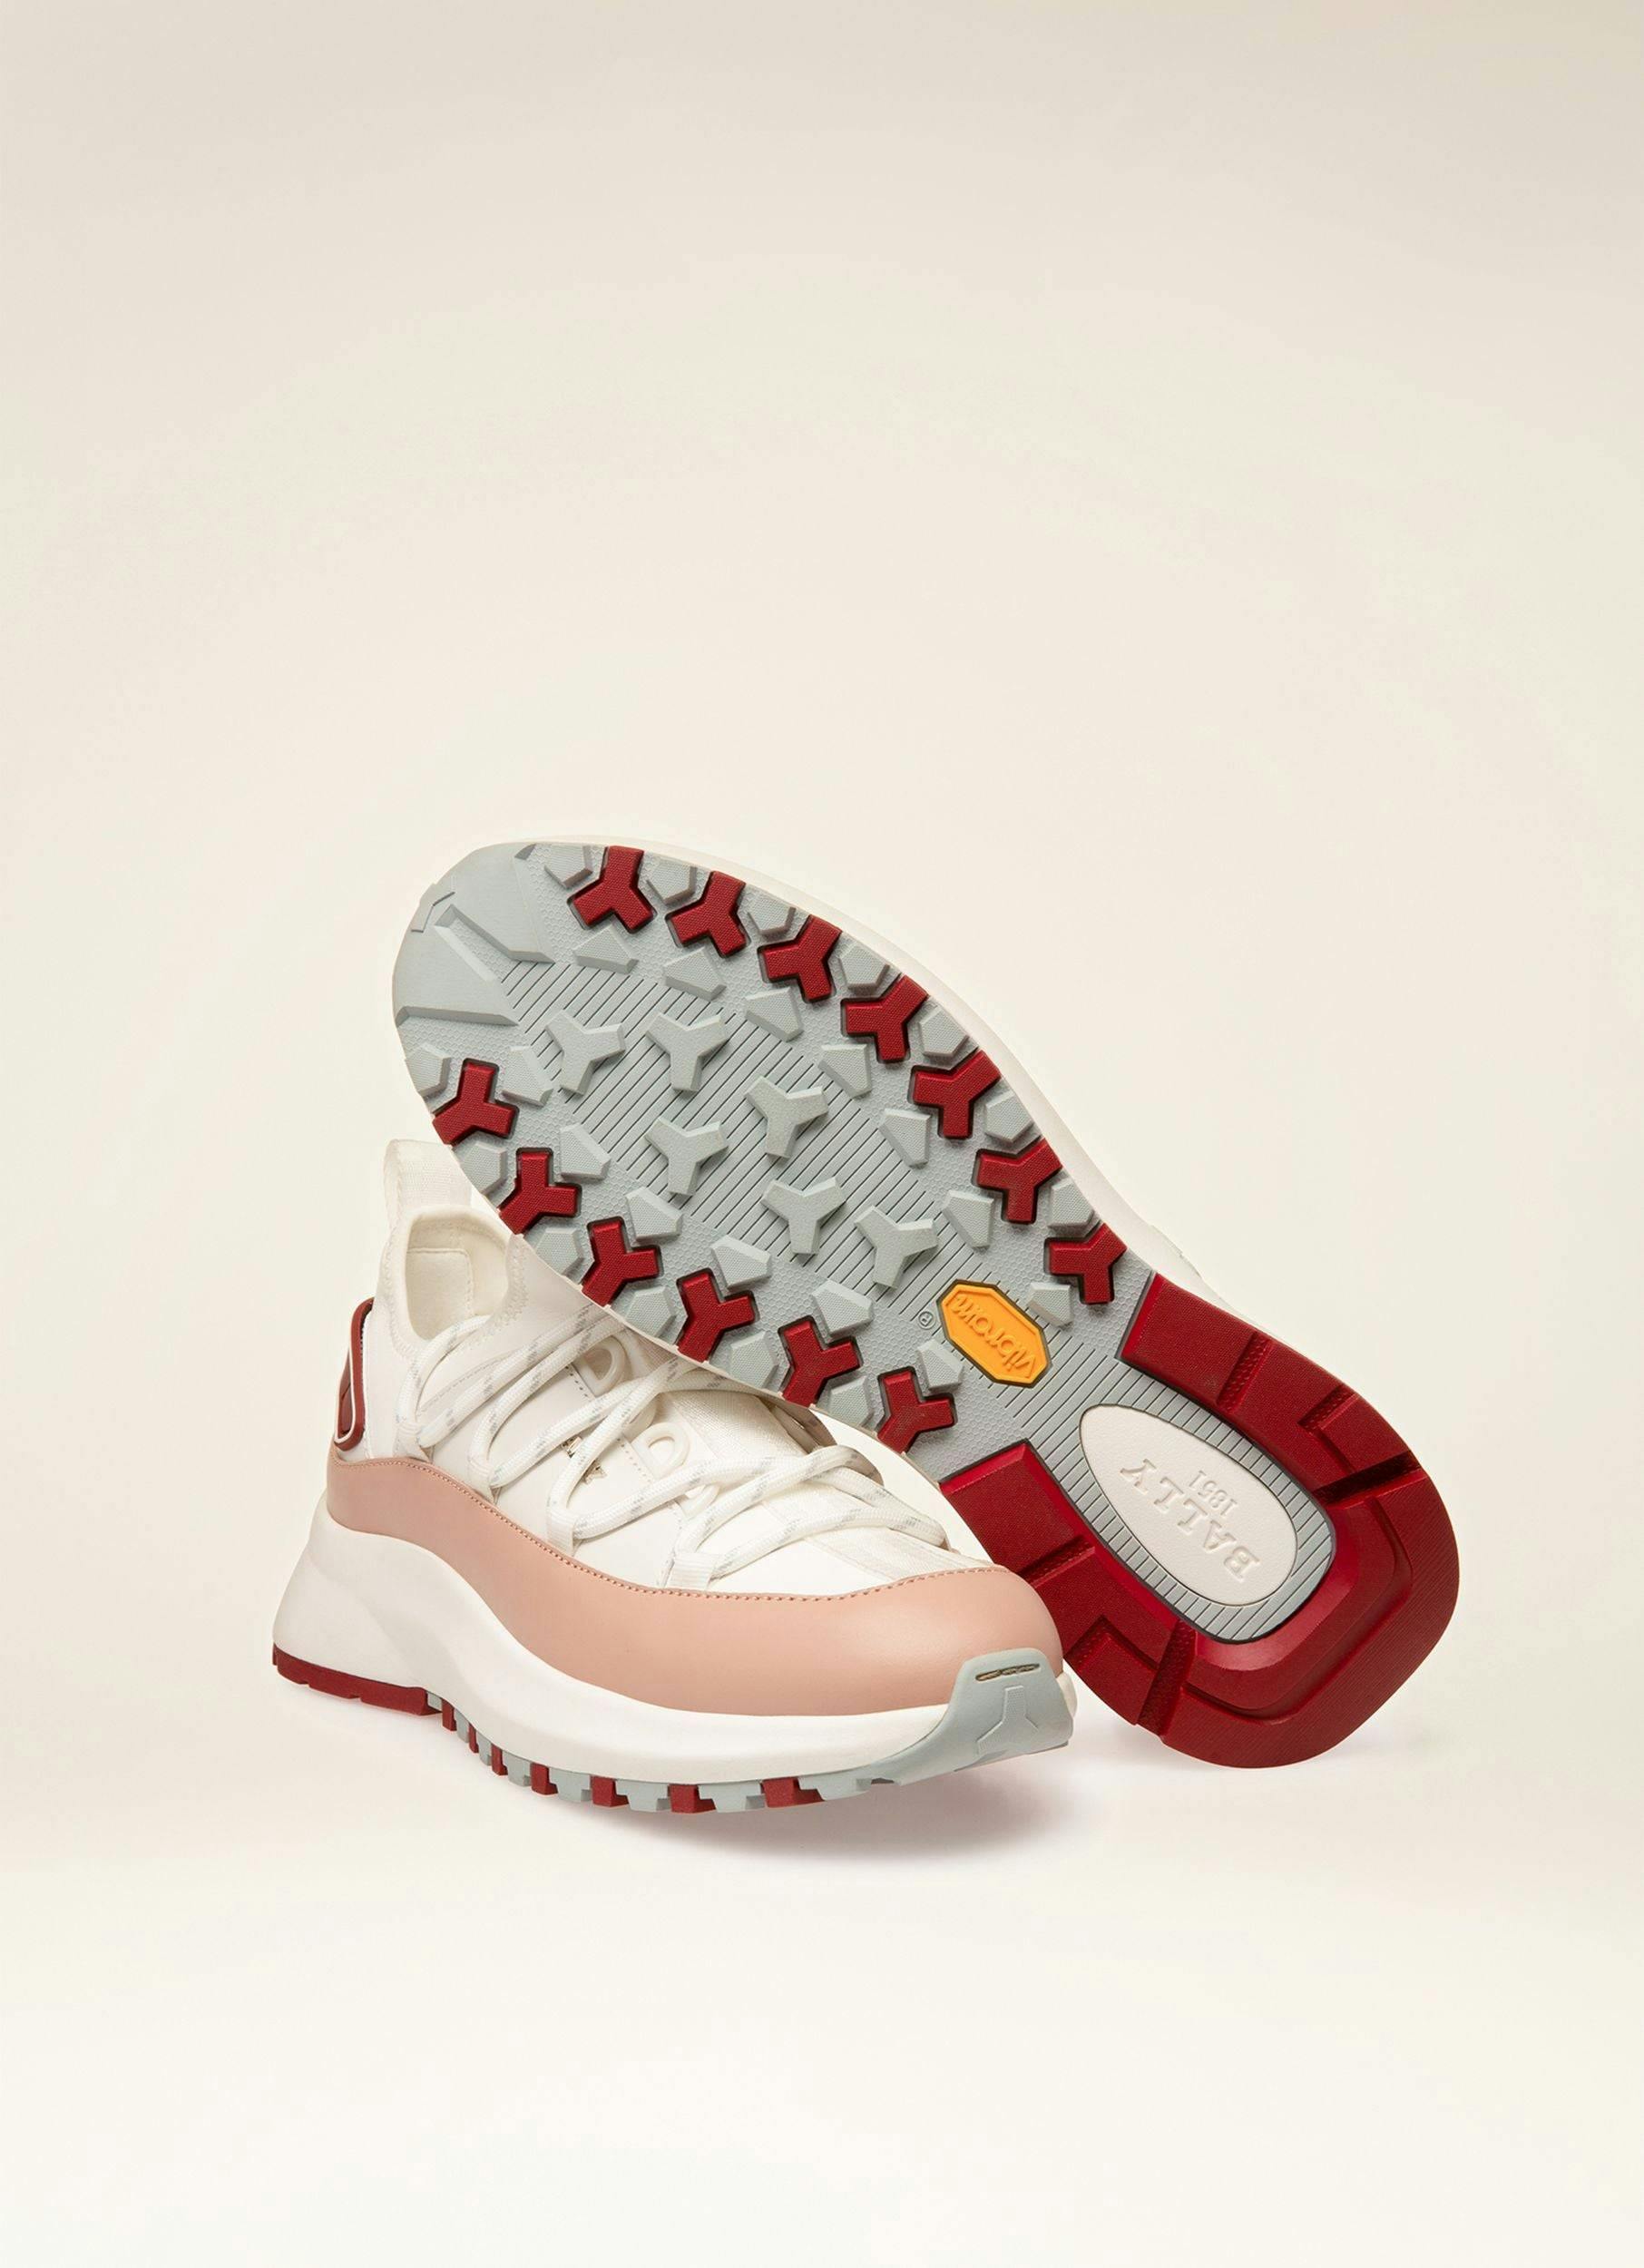 OUTLINE Leather Sneakers In White & Pink - Women's - Bally - 07